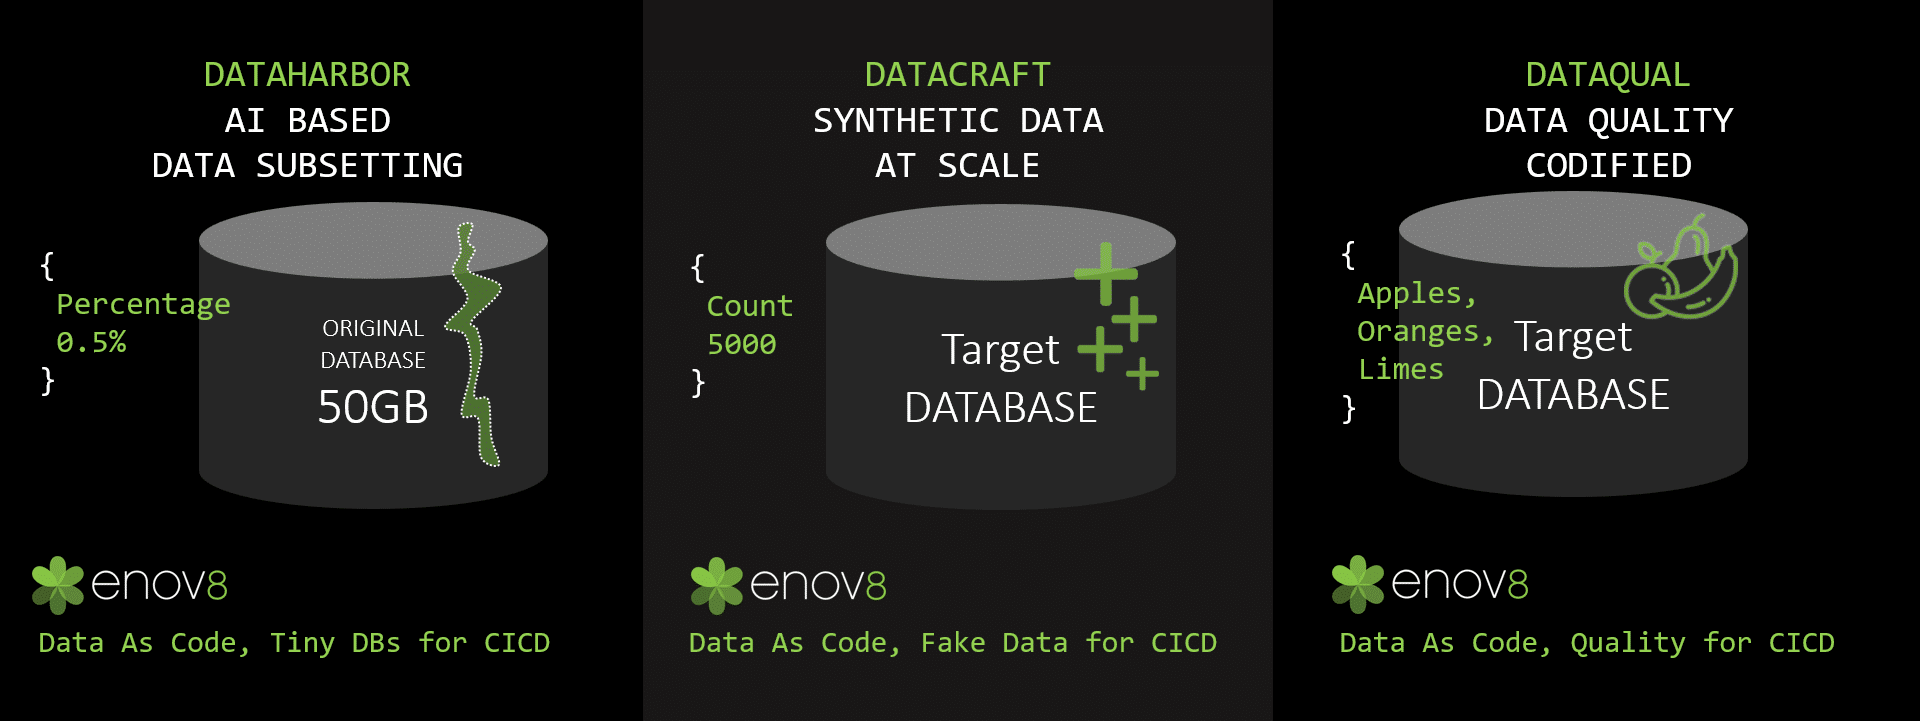 DataCraft is Enov8's AI based Data as Code Capability.